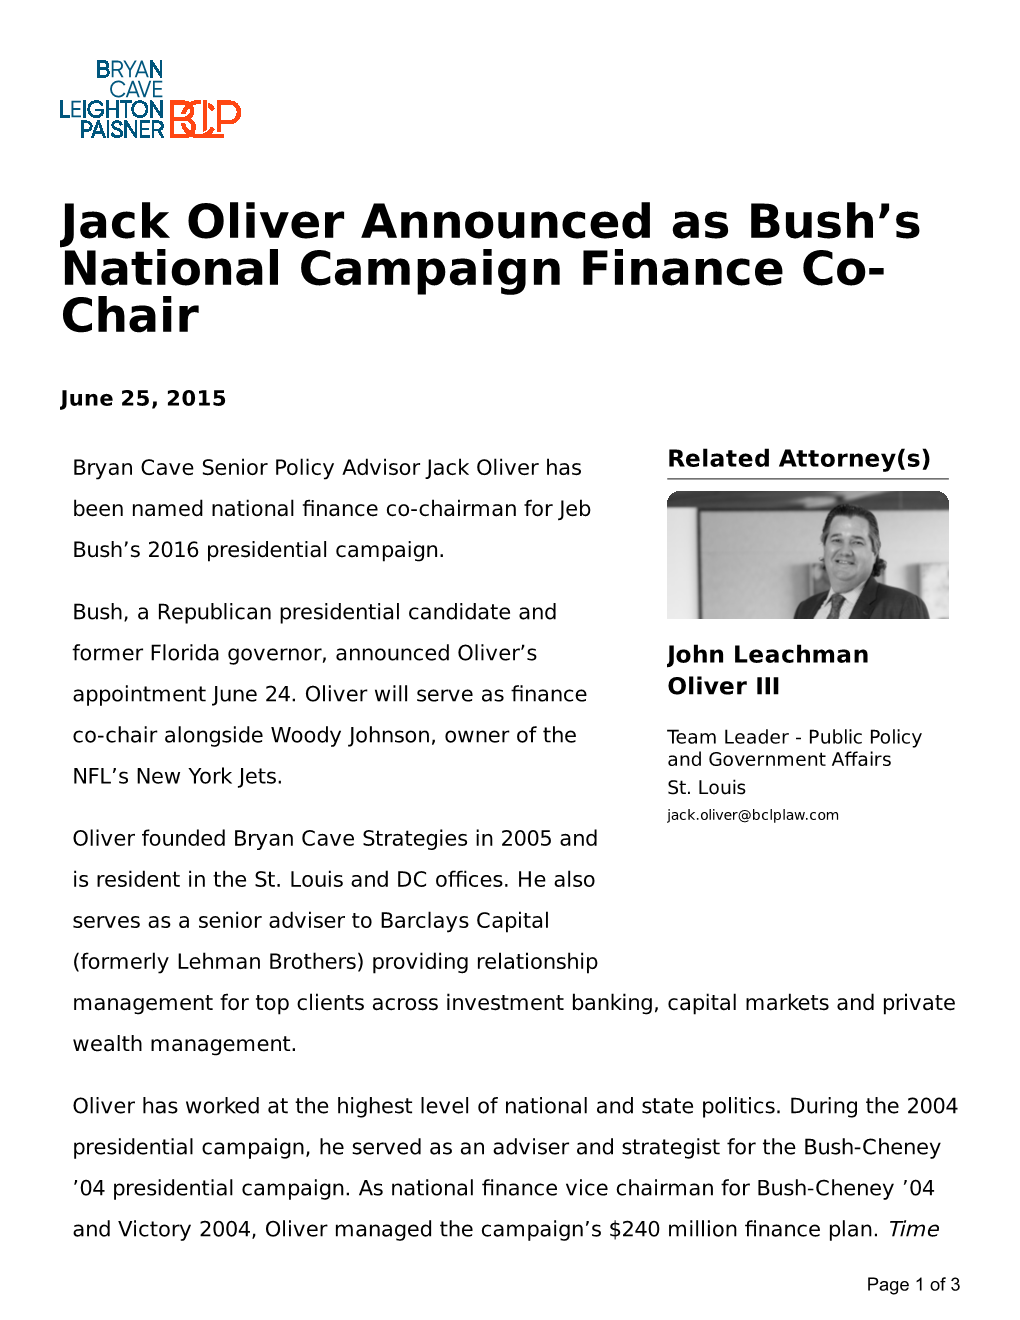 Jack Oliver Announced As Bush's National Campaign Finance Co